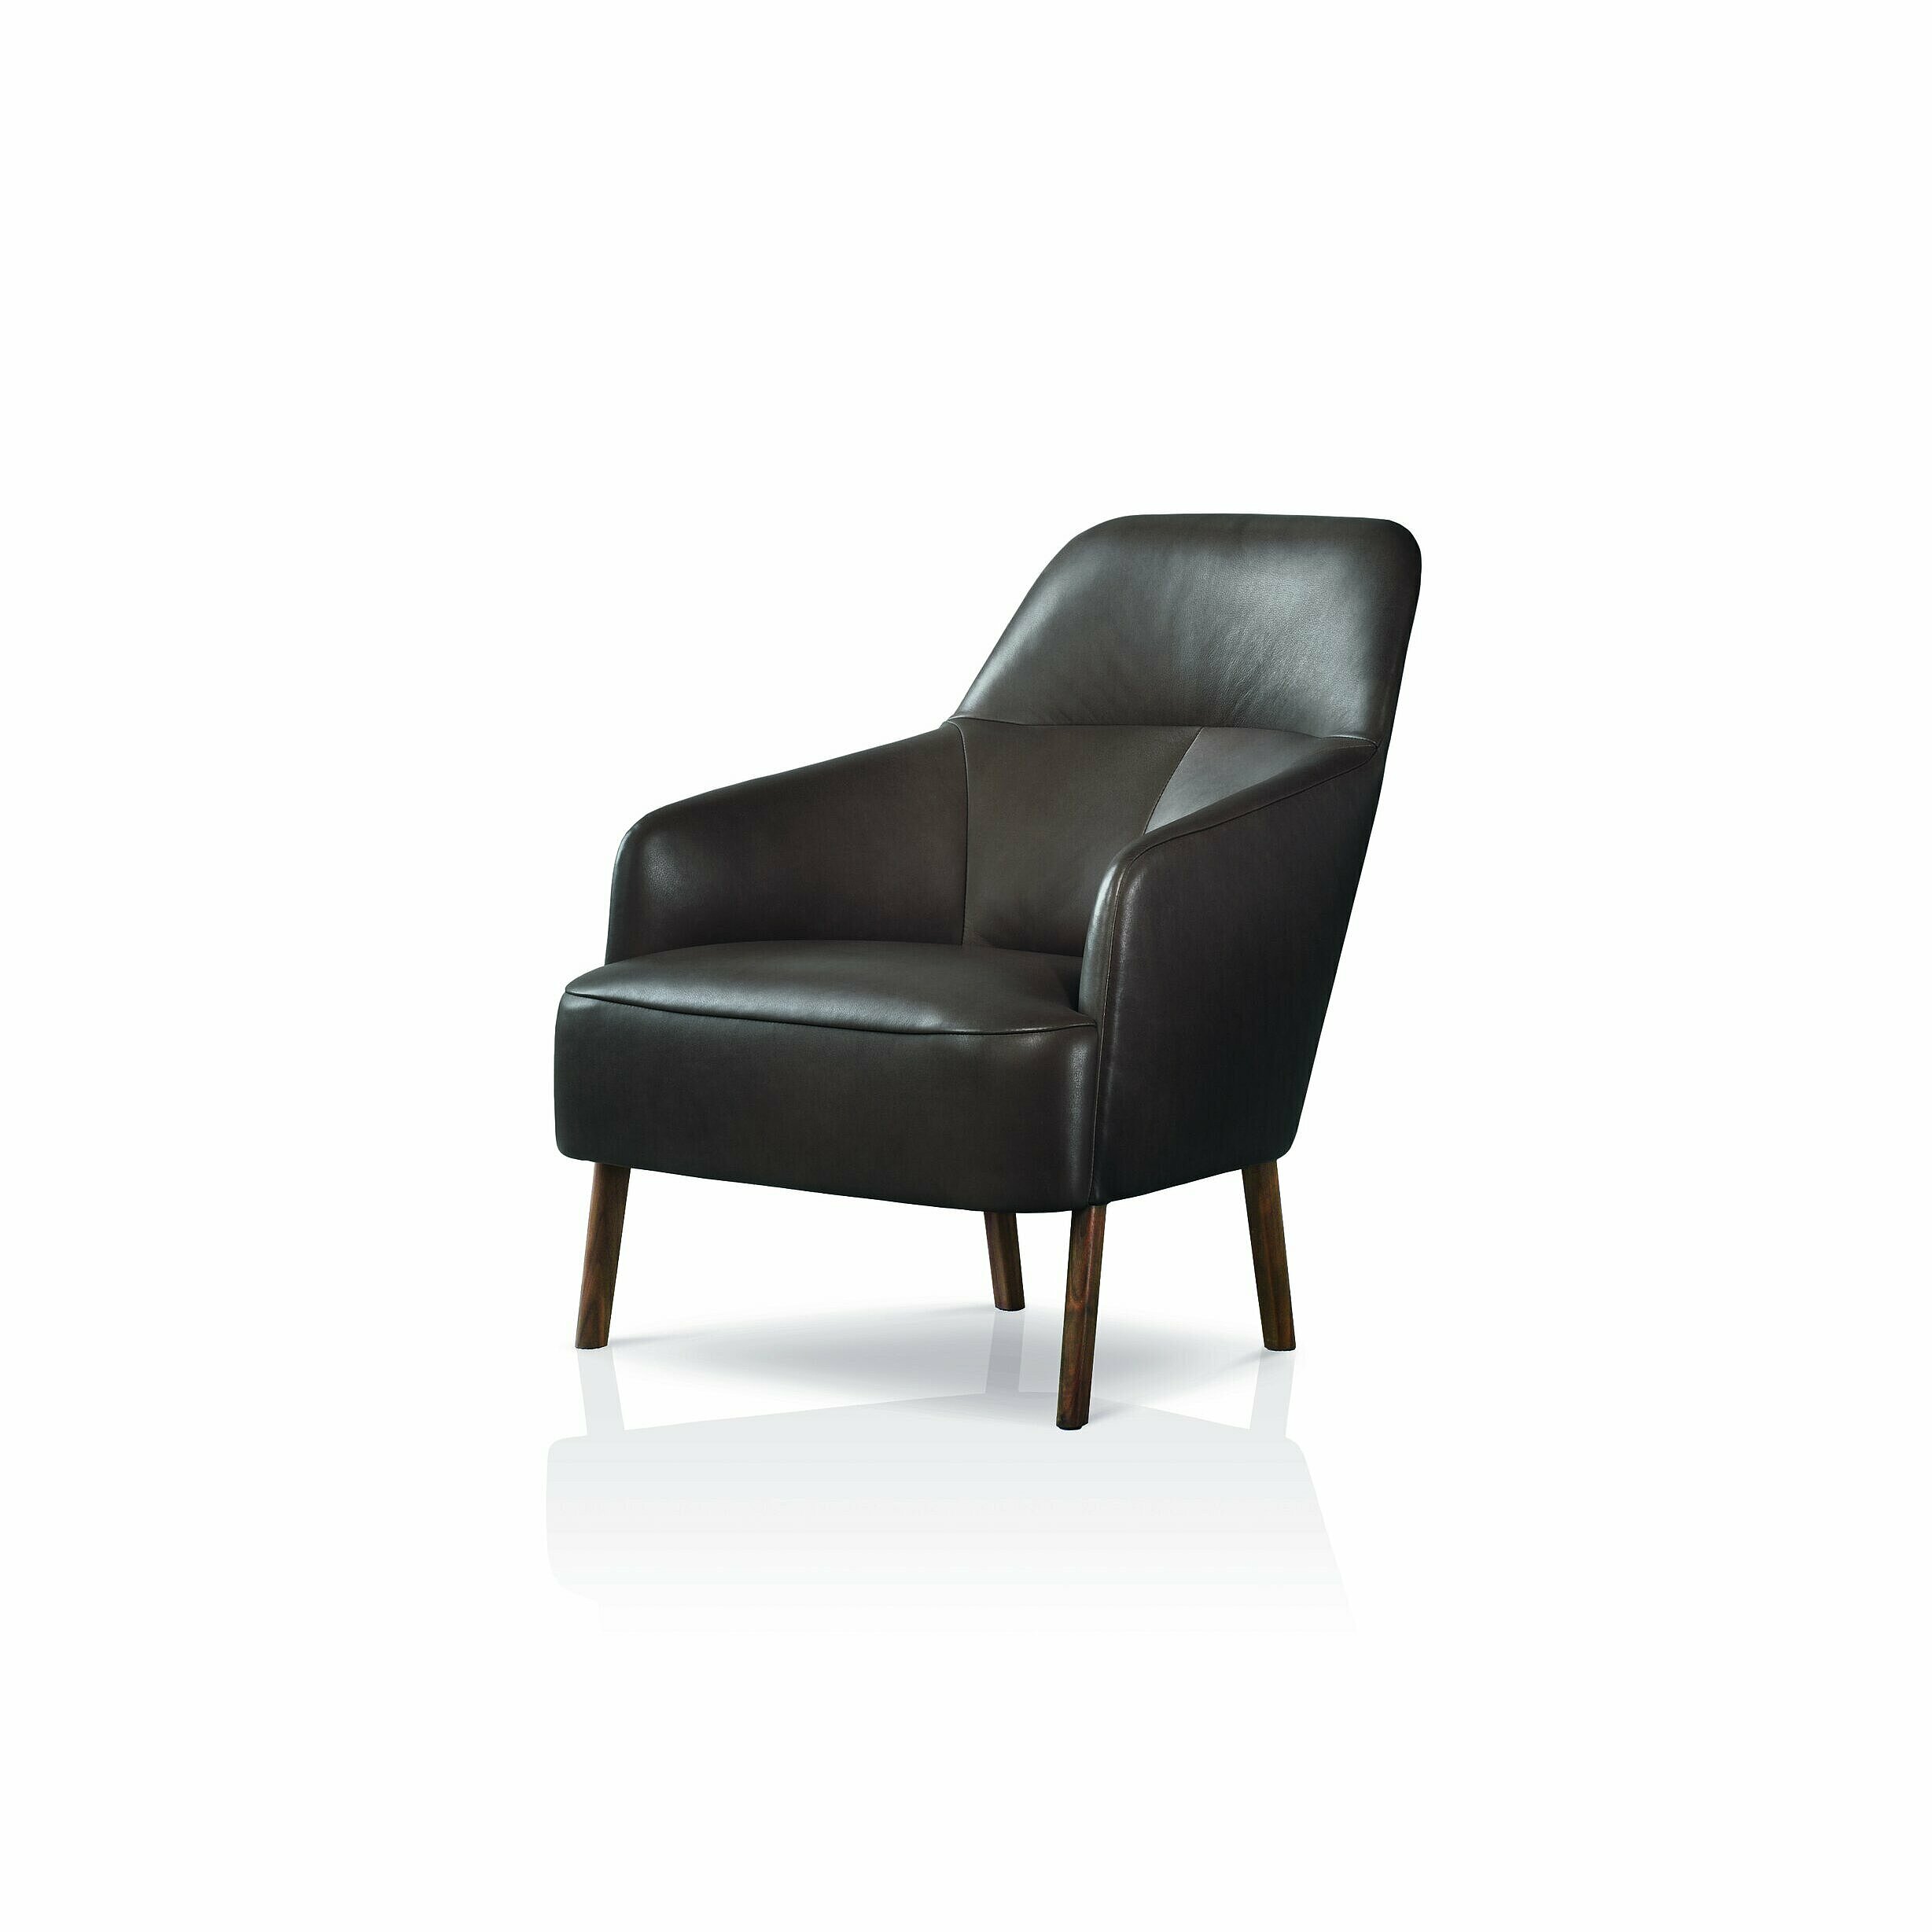 Mono armchair in brown Natural umbra leather